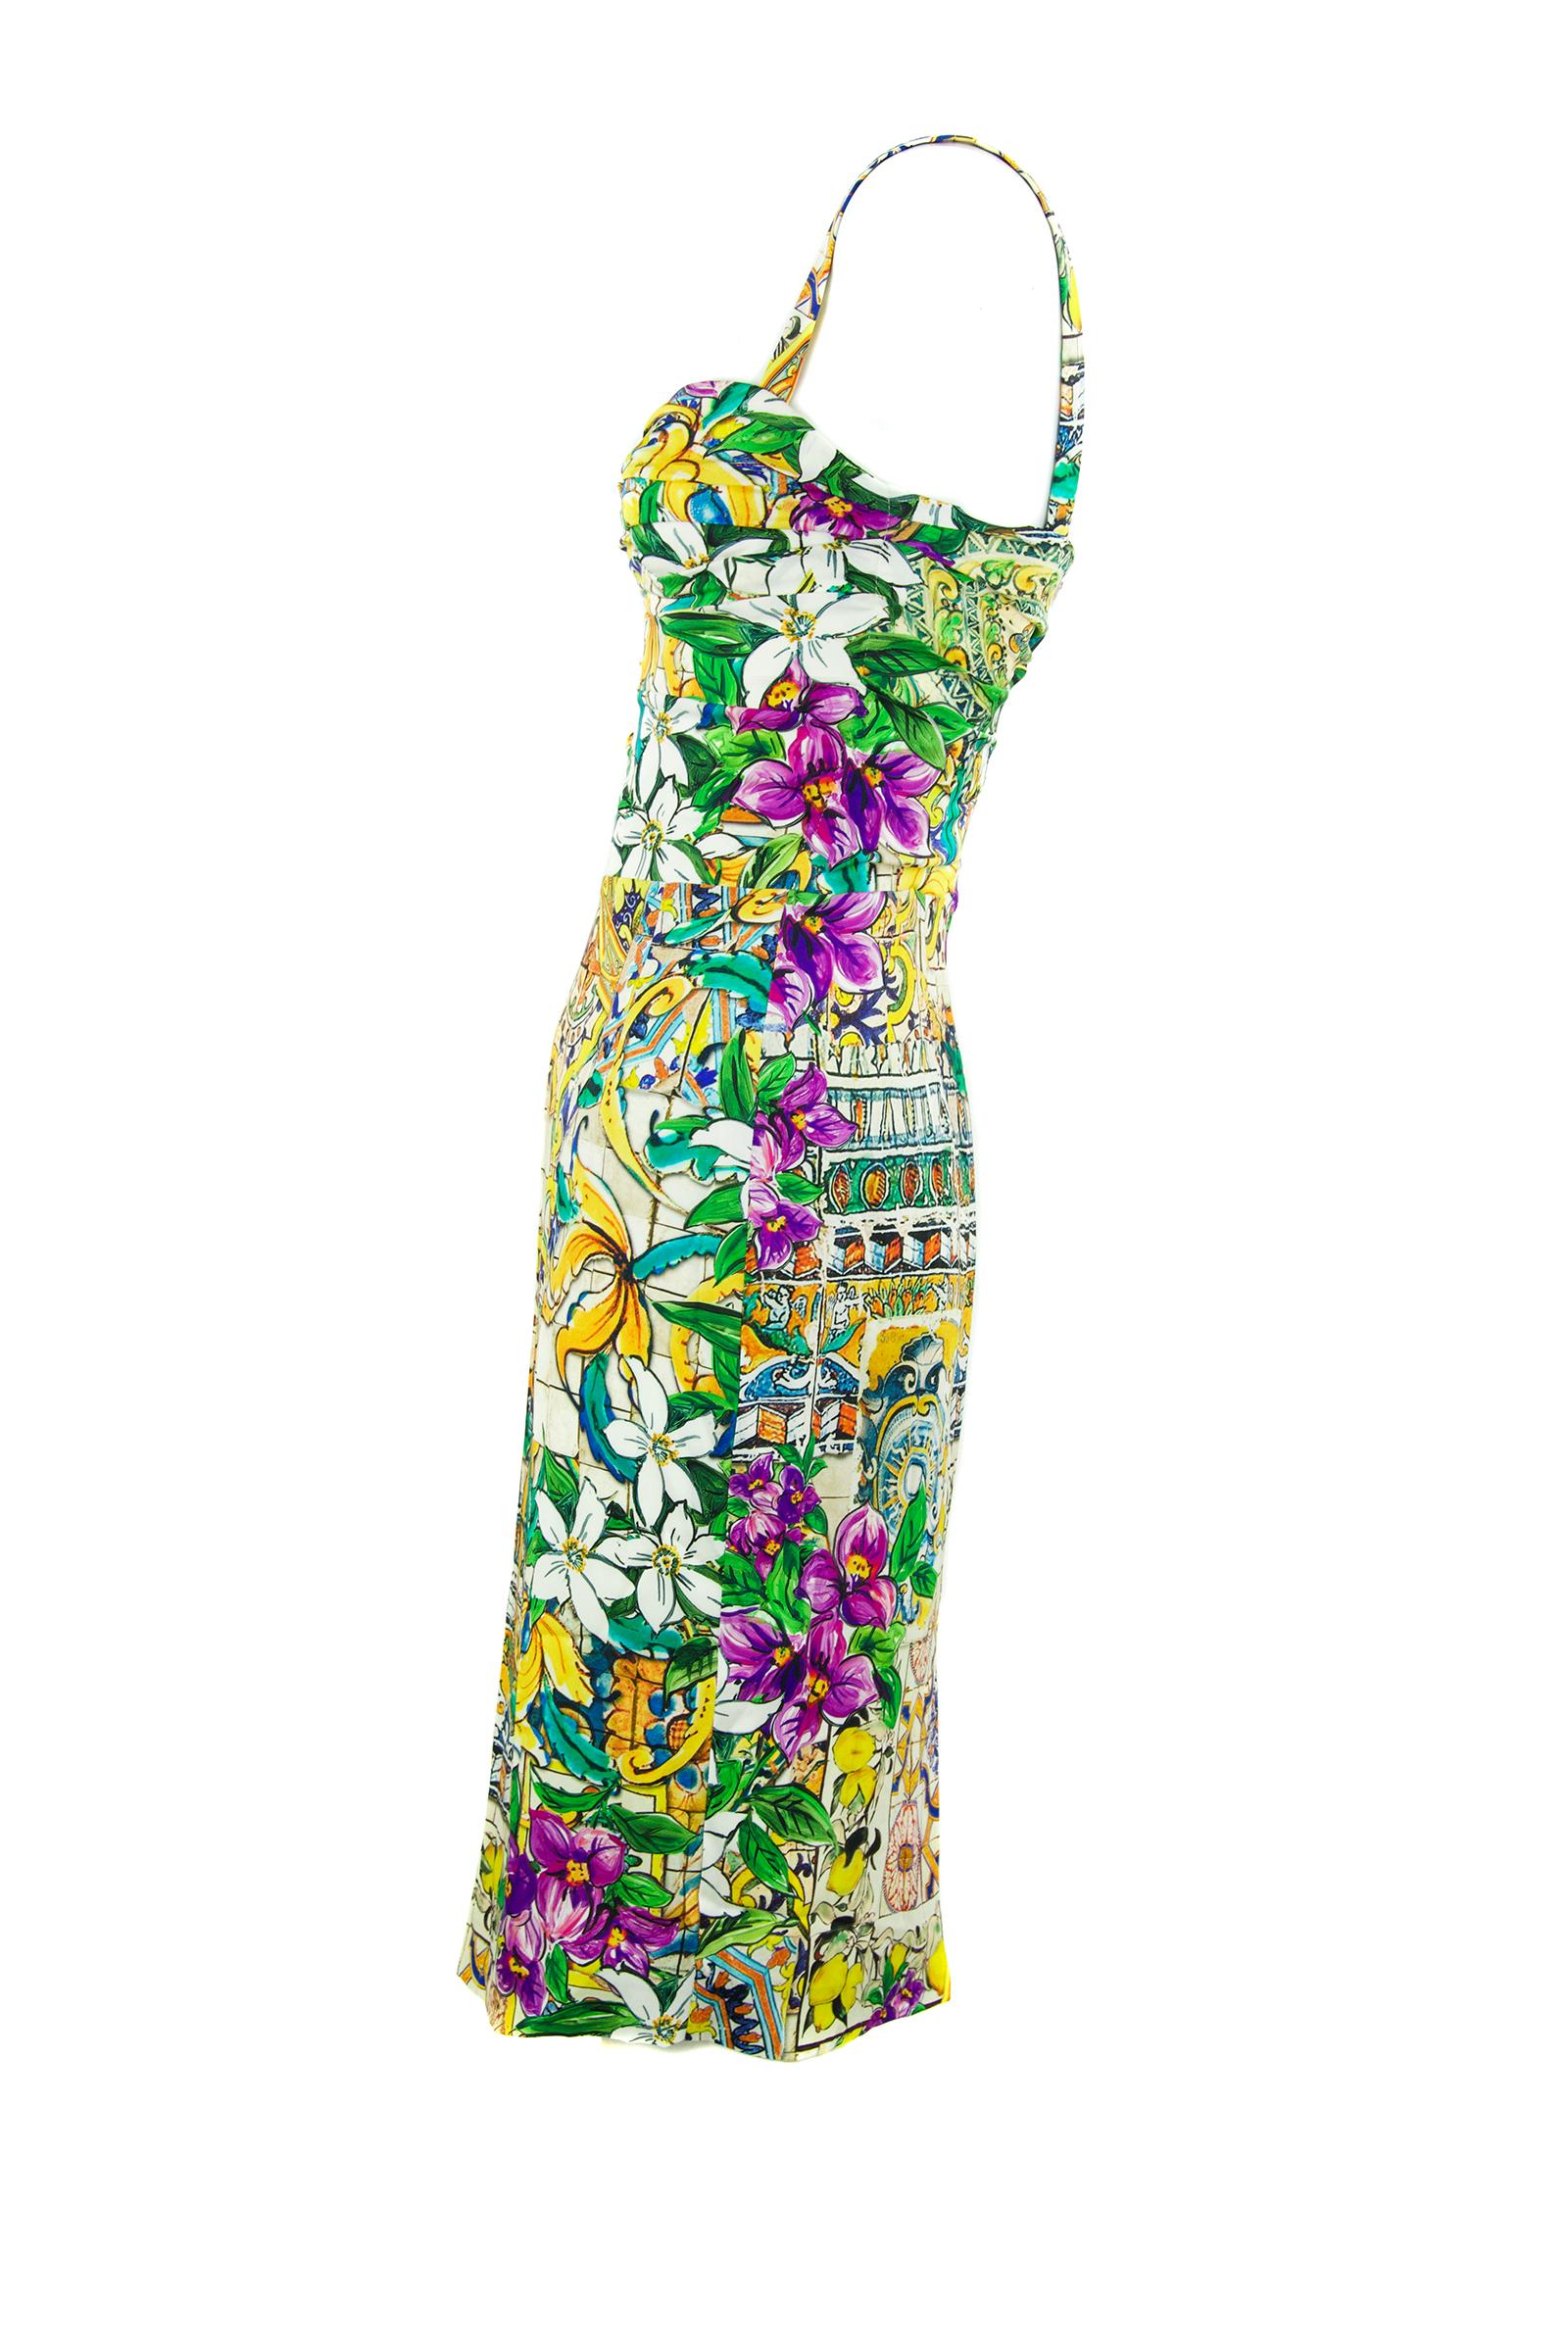 Incredible colors and pattern on this vibrant Dolce & Gabbana printed dress.  Features pleated fabric on the bodice and boning for a sexy, structured look.  Fabric is silk charmeuse with a little stretch for some extra give.

Size: IT 40

Condition: